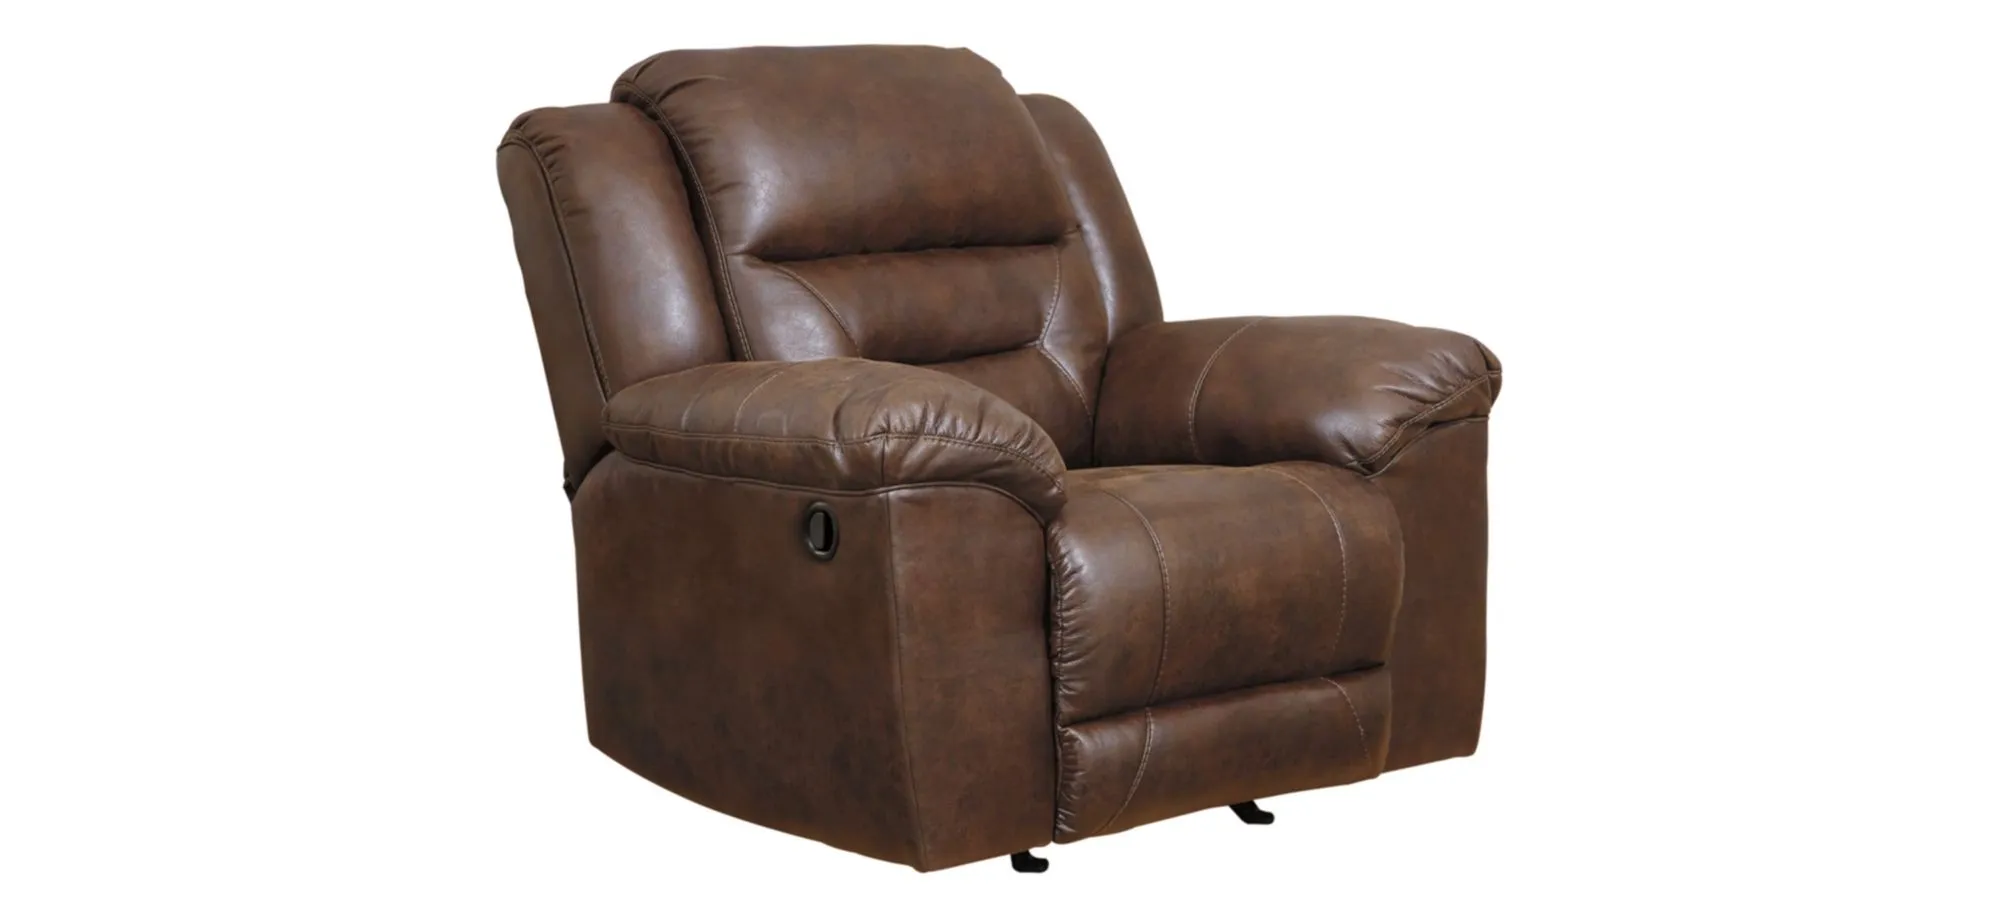 Stoneland Rocker Recliner in Chocolate by Ashley Furniture